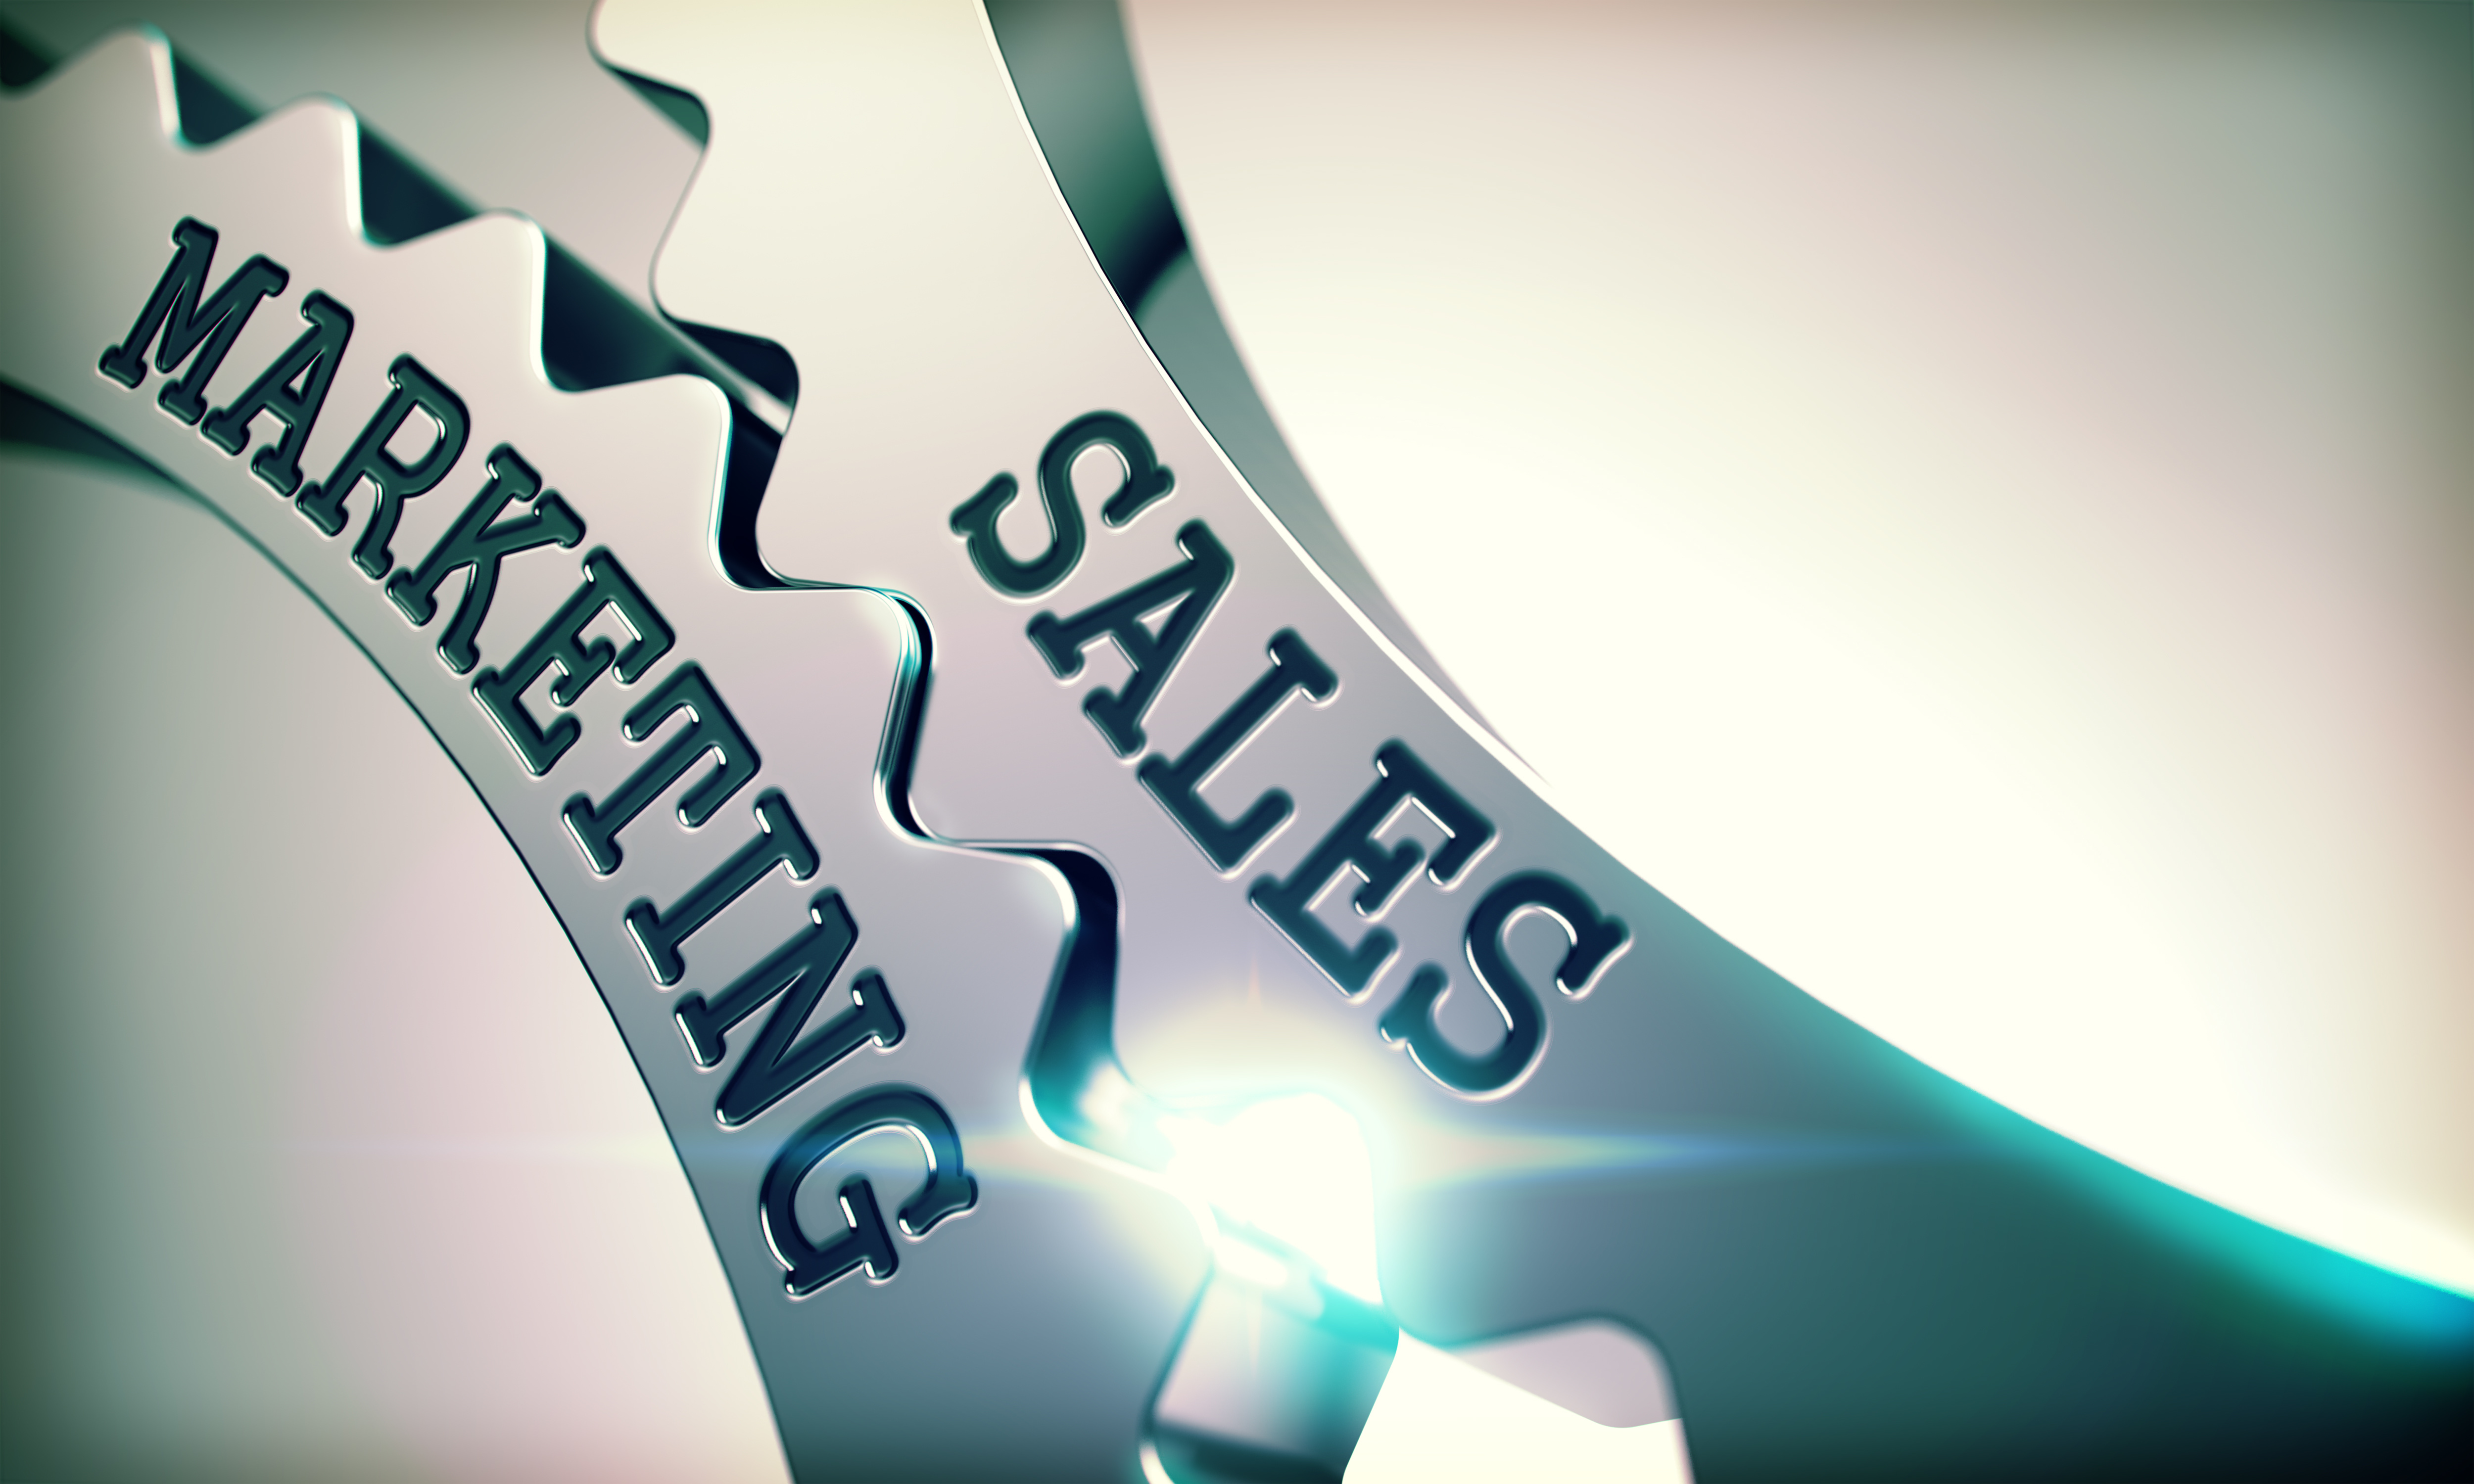 Sales and marketing equals smarketing